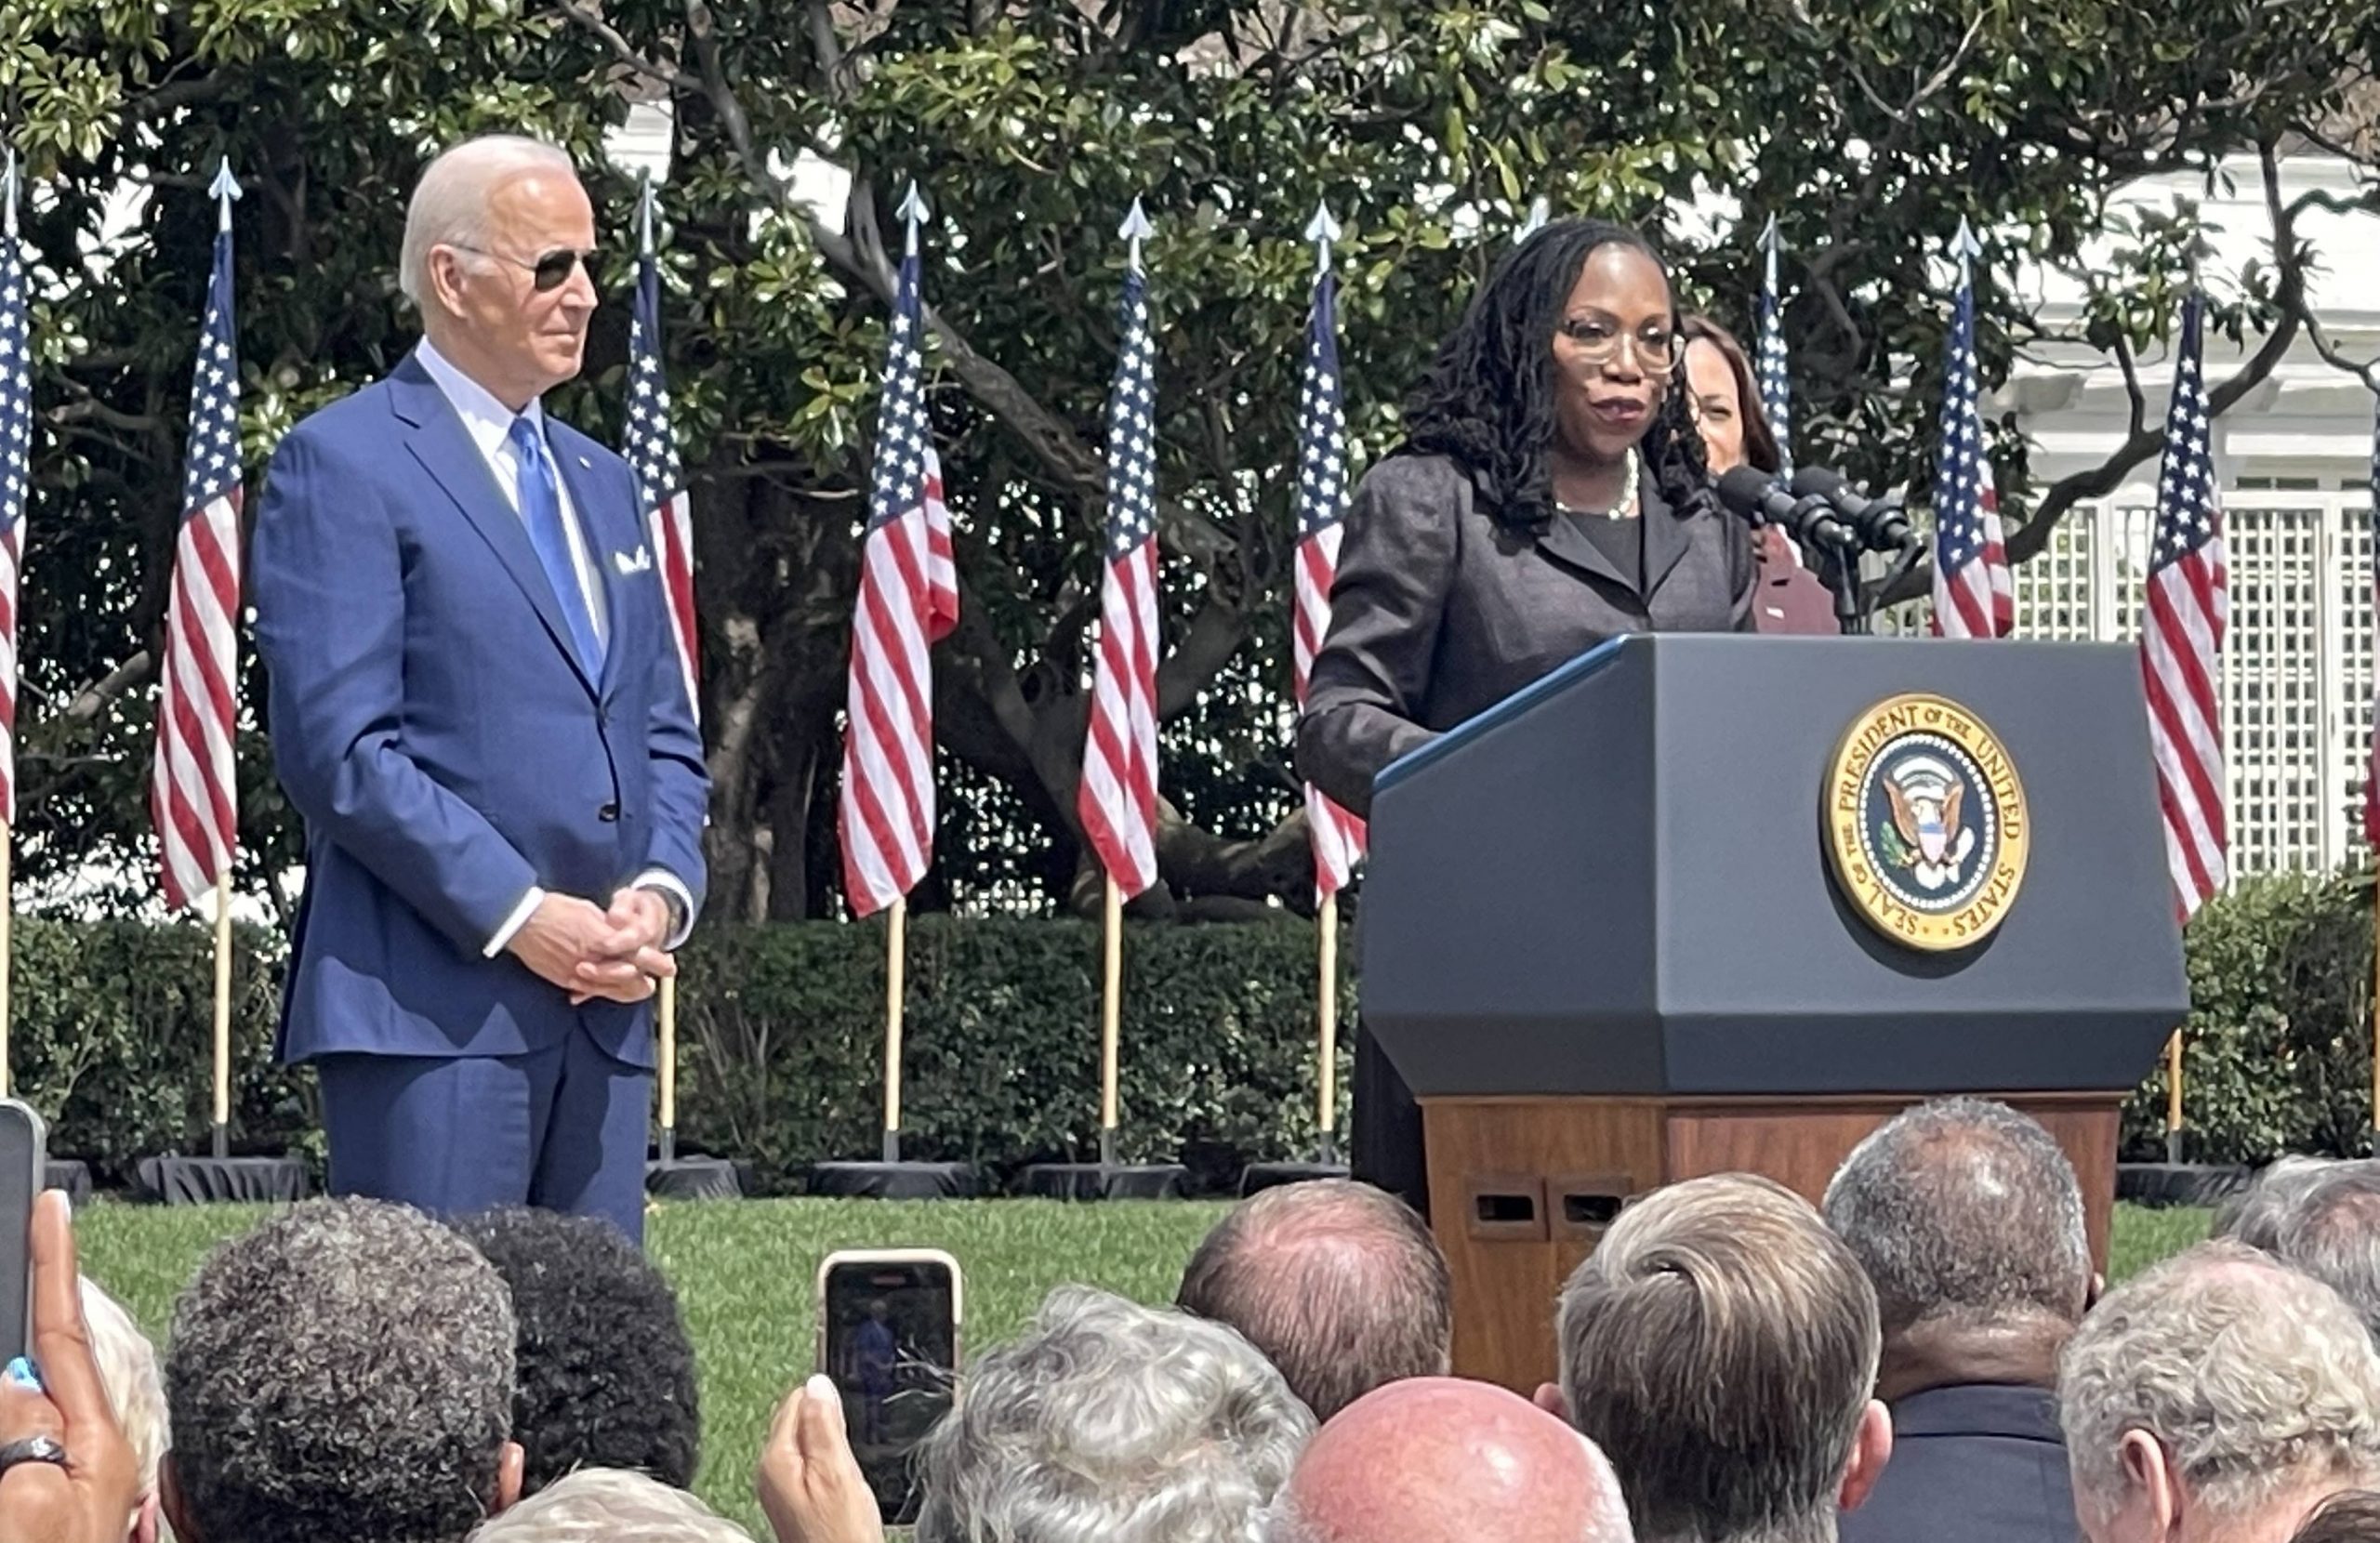 Ketanji Brown Jackson stands speaking at a lectern in front of a crowd outdoors. Joe Biden looks on with hands clasped in front of him.